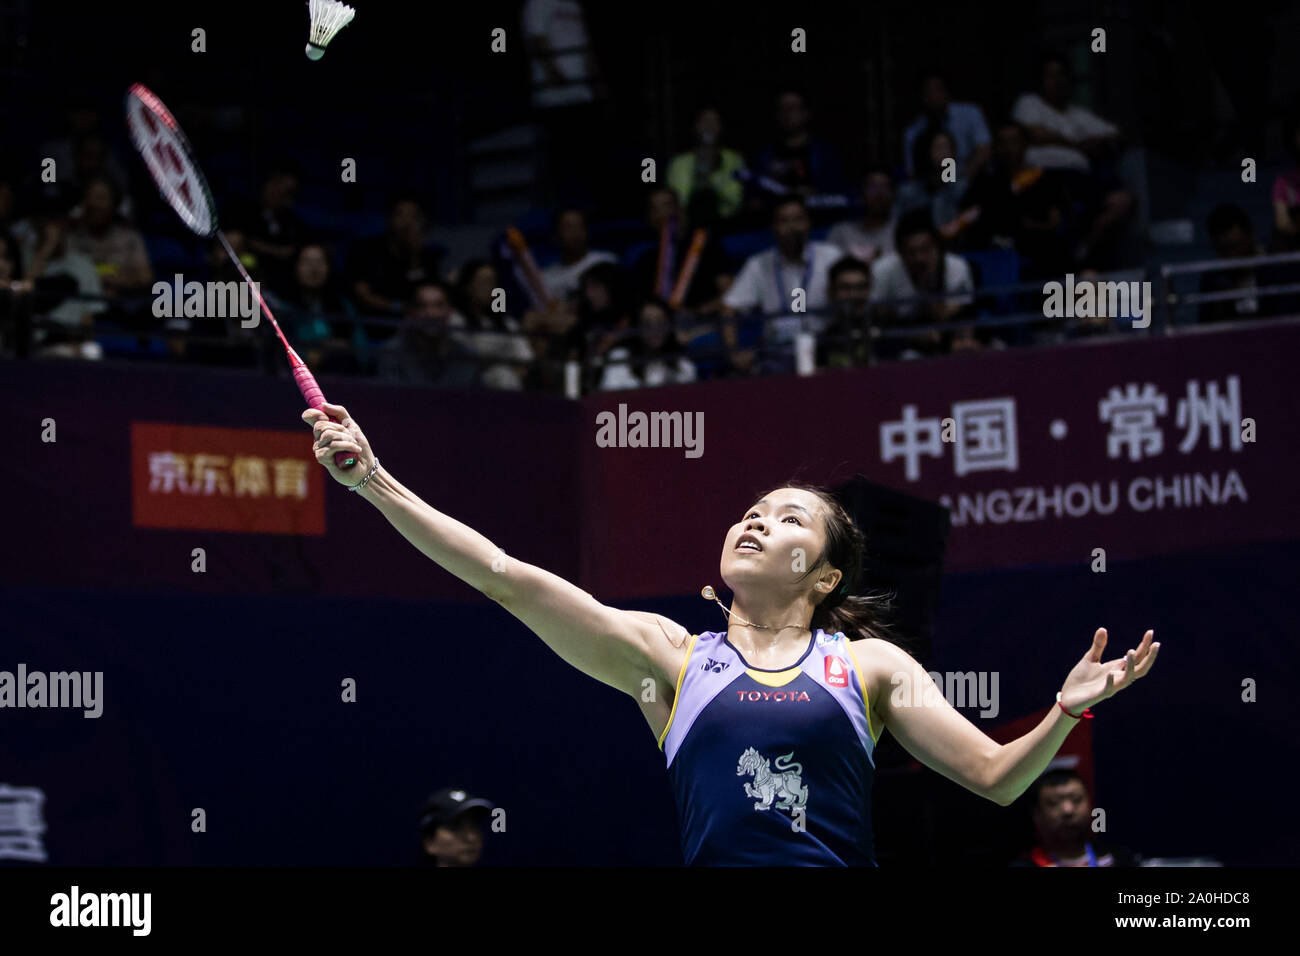 Thai professional badminton player Ratchanok Intanon competes against Japanese professional badminton player Sayaka Takahashi at the quarterfinal of women's single of VICTOR China Open 2019, in Changzhou city, east China's Jiangsu province, 20 September 2019. Japanese professional badminton player Sayaka Takahashi defeated Thai professional badminton player Ratchanok Intanon with 2-1 at the quarterfinal of women's single of VICTOR China Open 2019, in Changzhou city, east China's Jiangsu province, 20 September 2019. Stock Photo